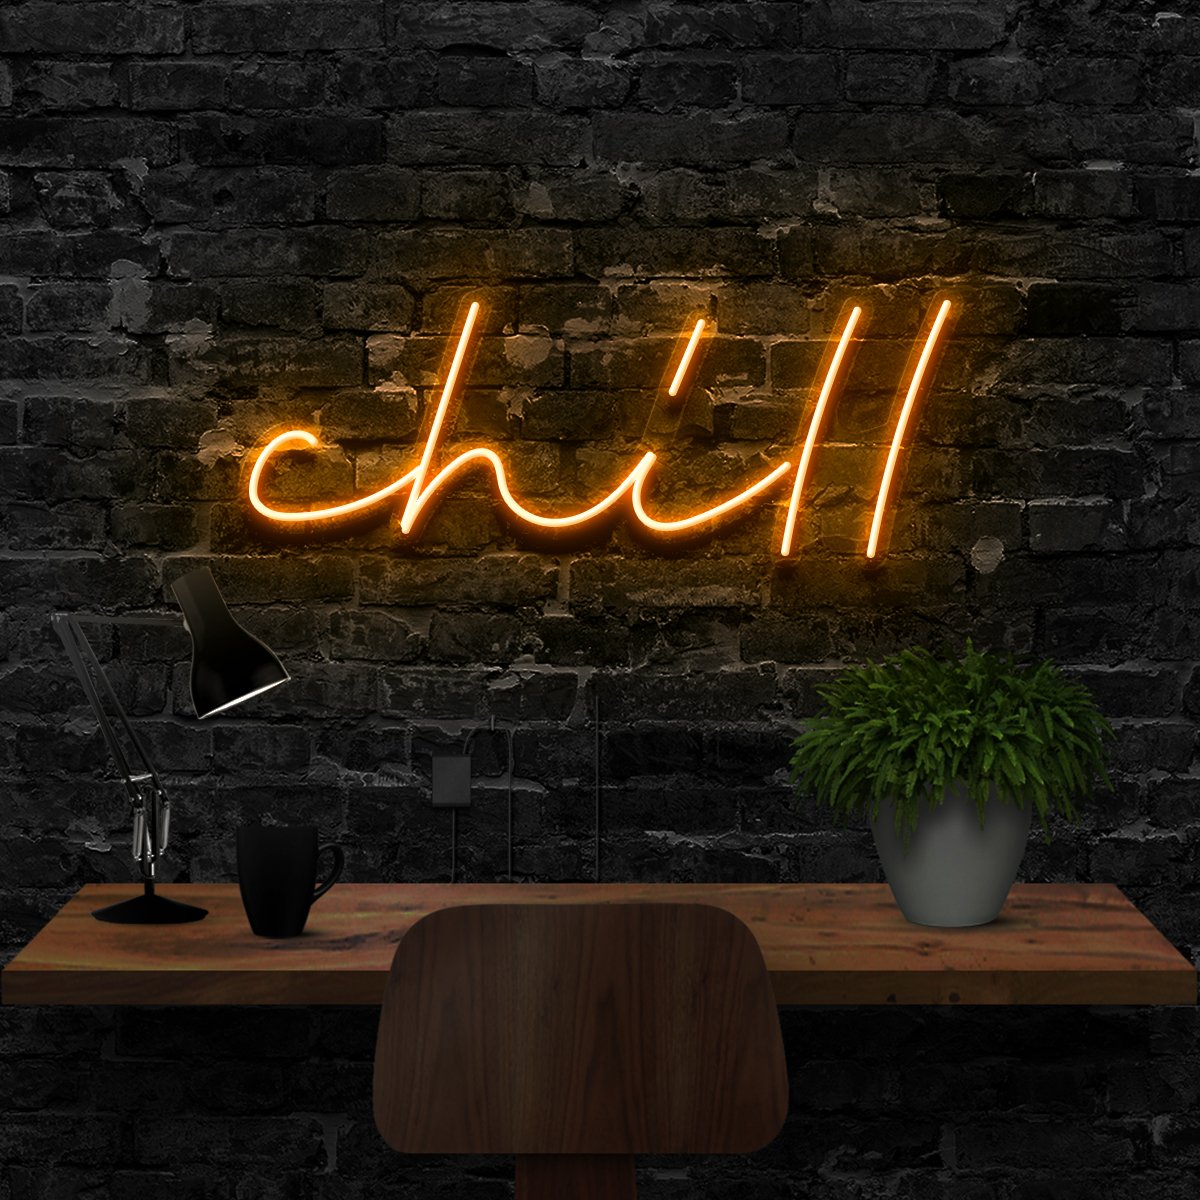 "Chill" Neon Sign 40cm (1.3ft) / Orange / LED Neon by Neon Icons